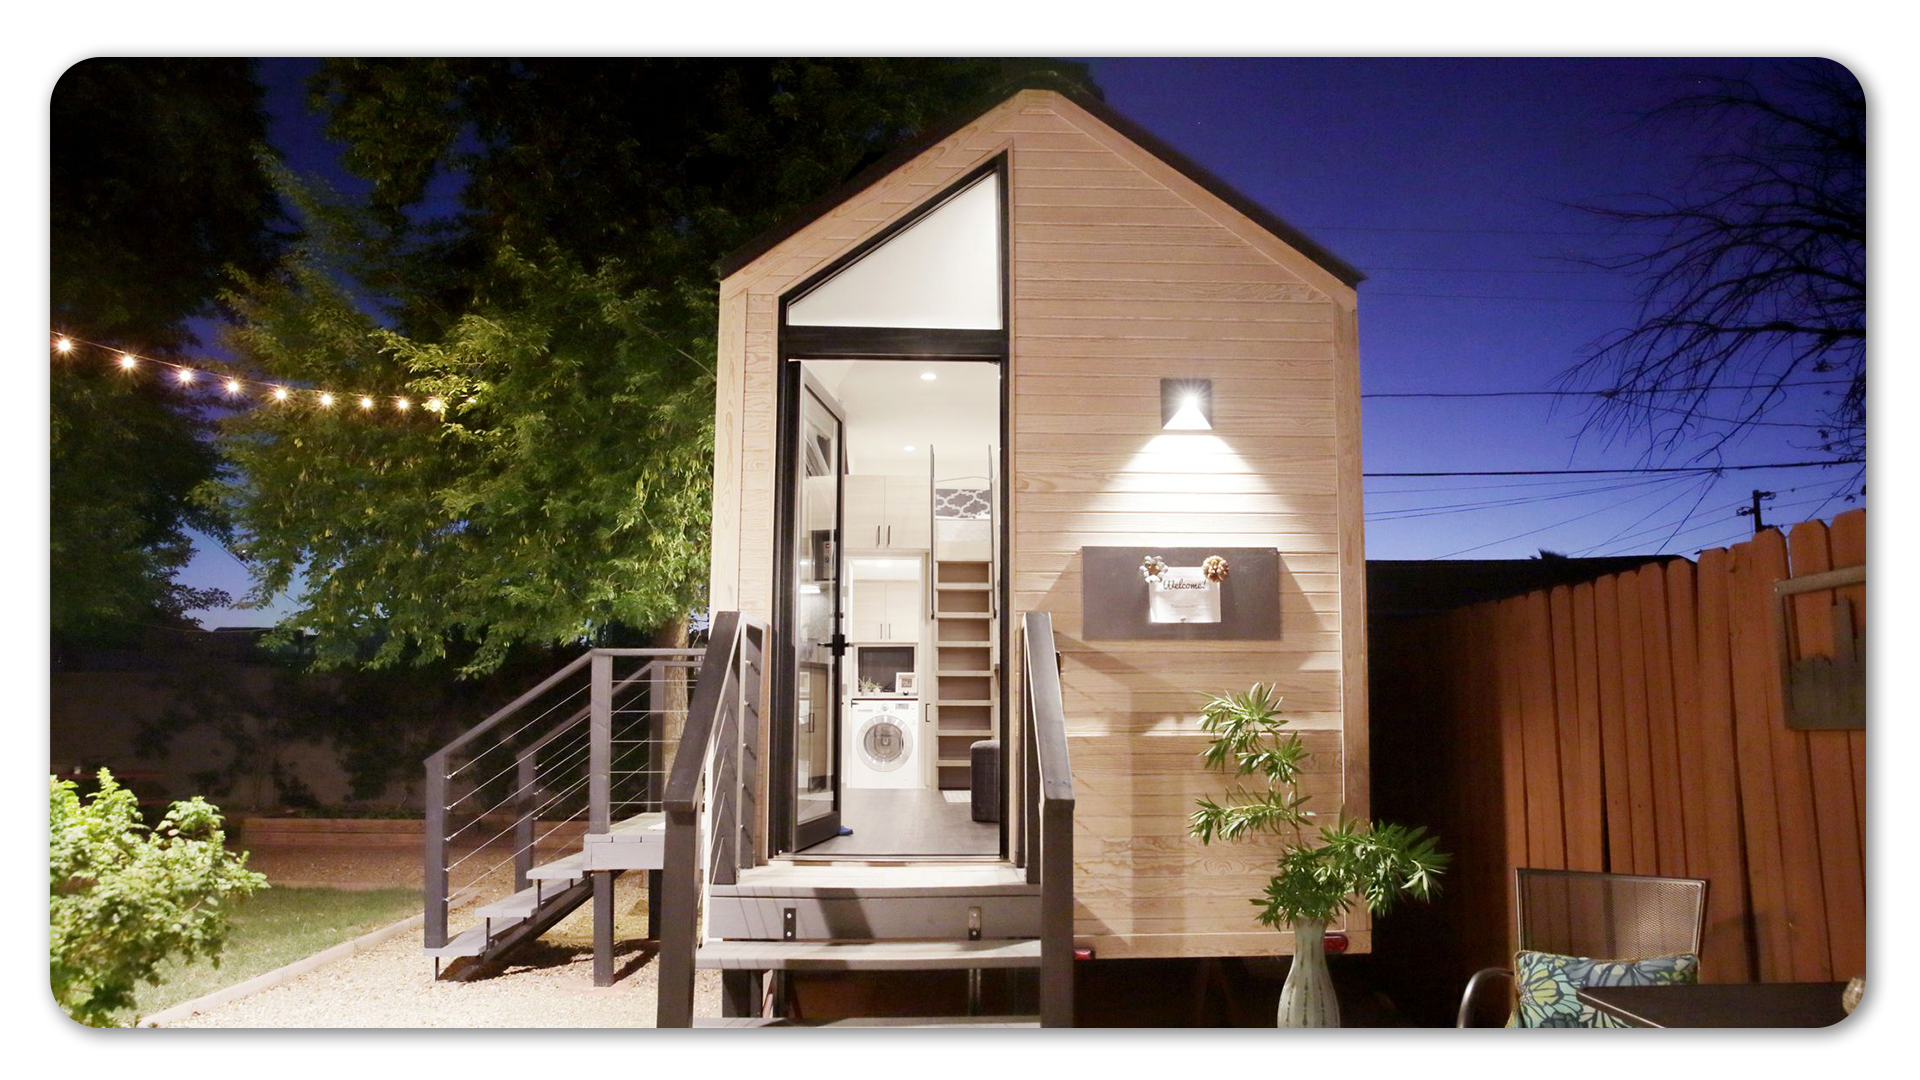 Photo of tiny home at night, all lights shining, white interior